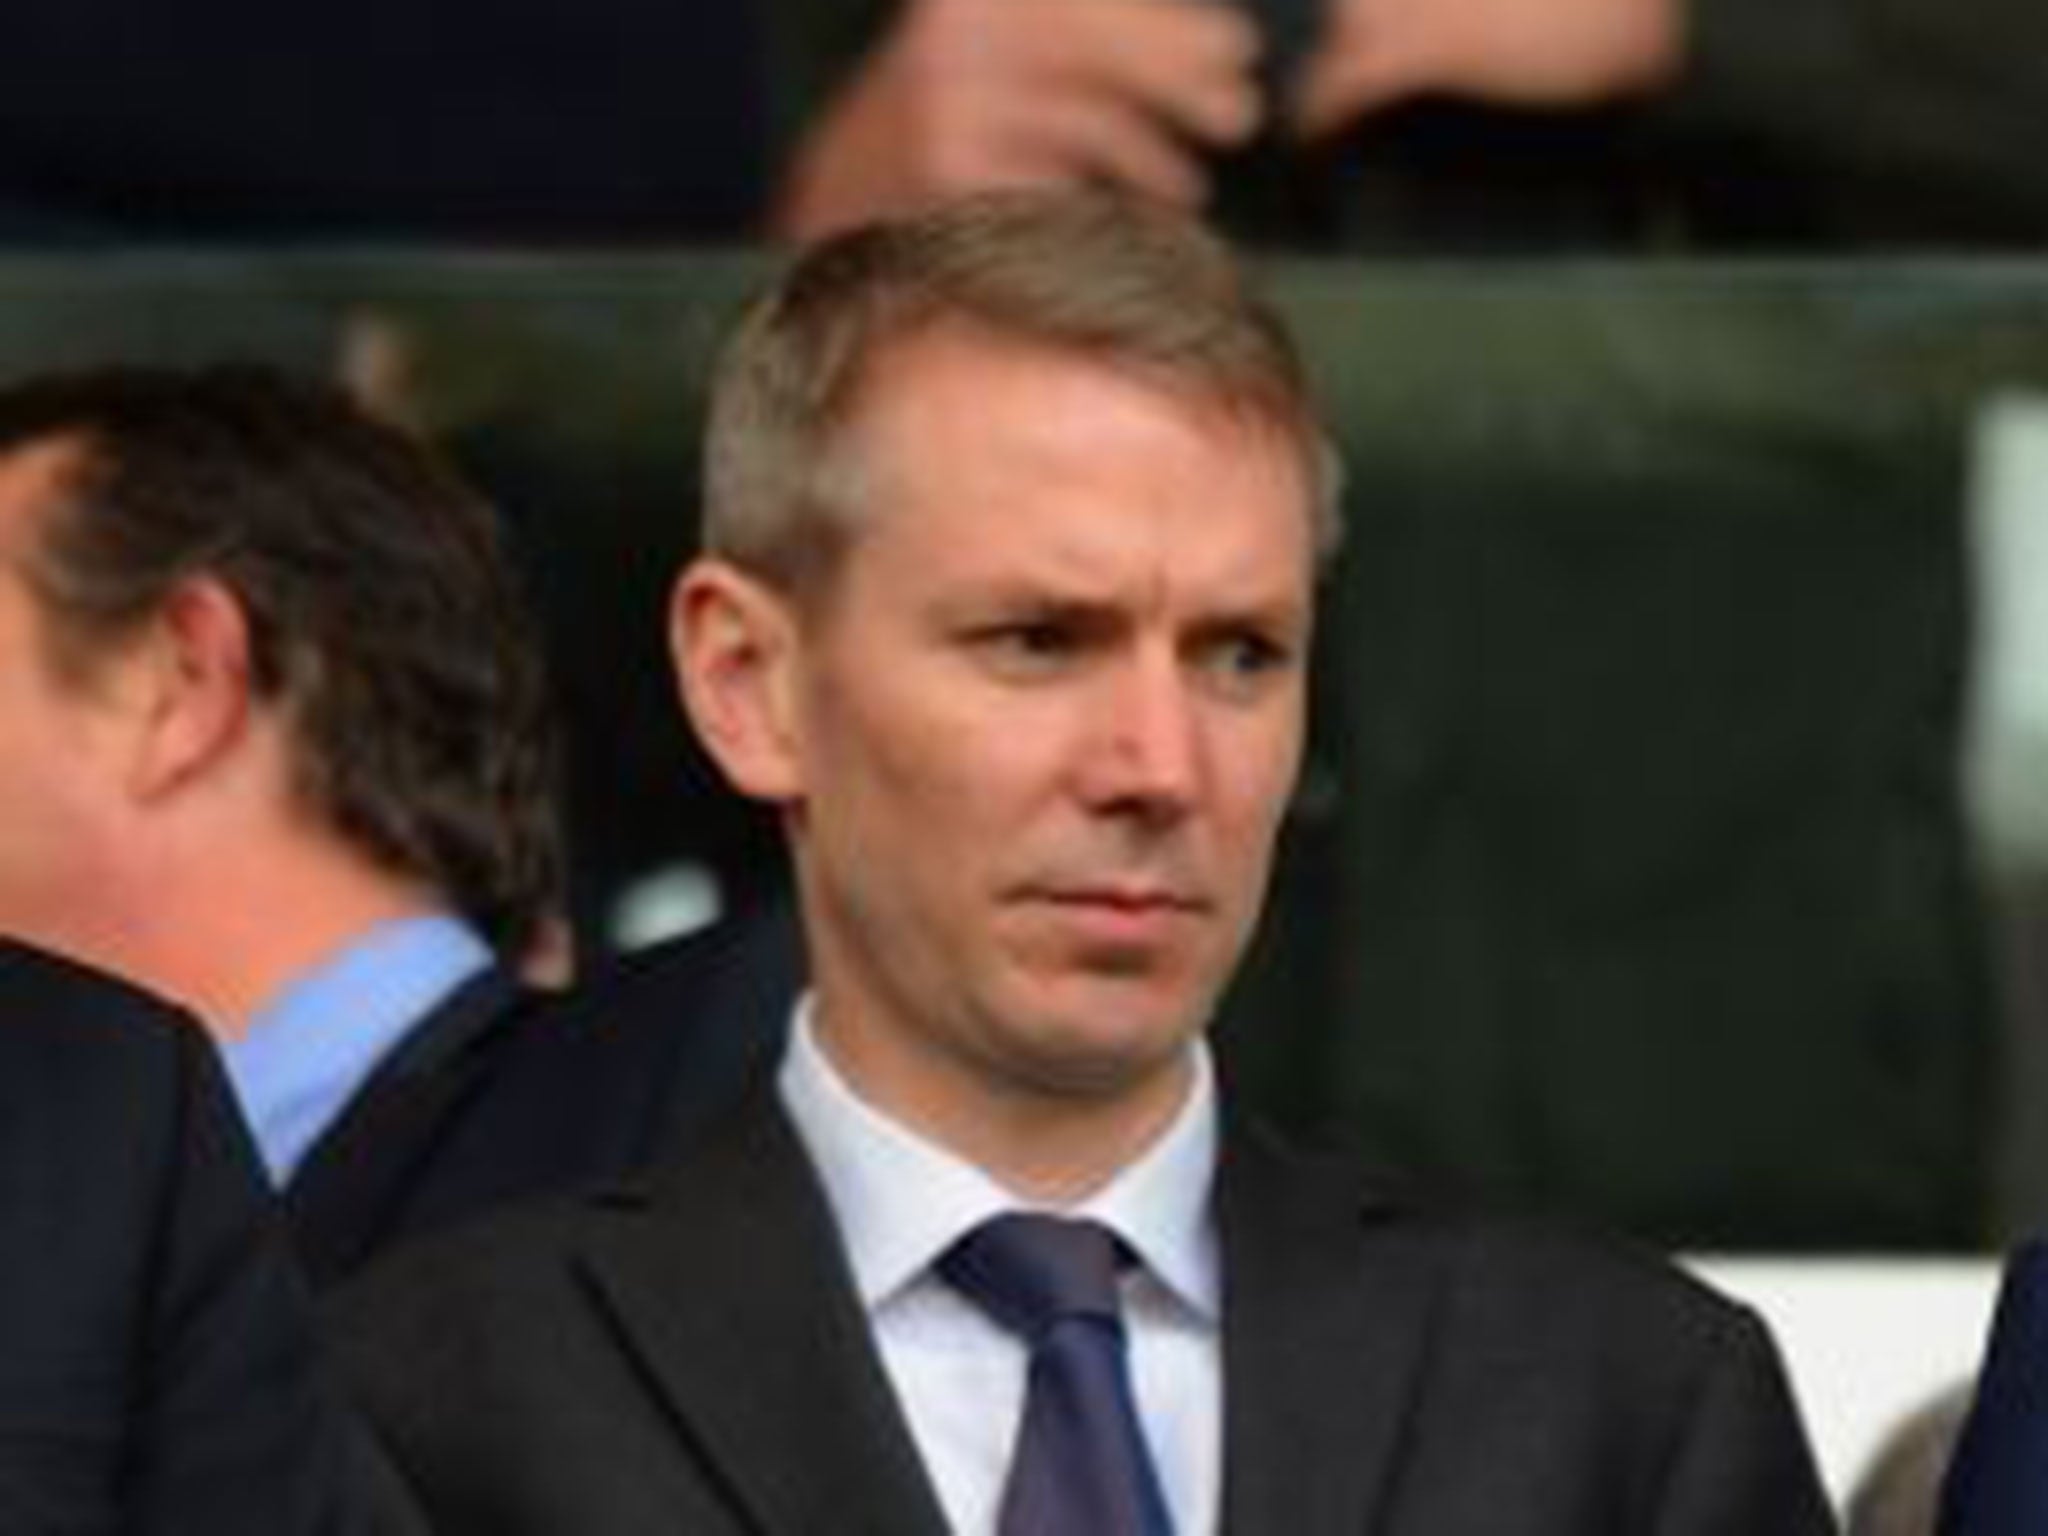 Iain Moody resigned from his Crystal Palace post following the allegations